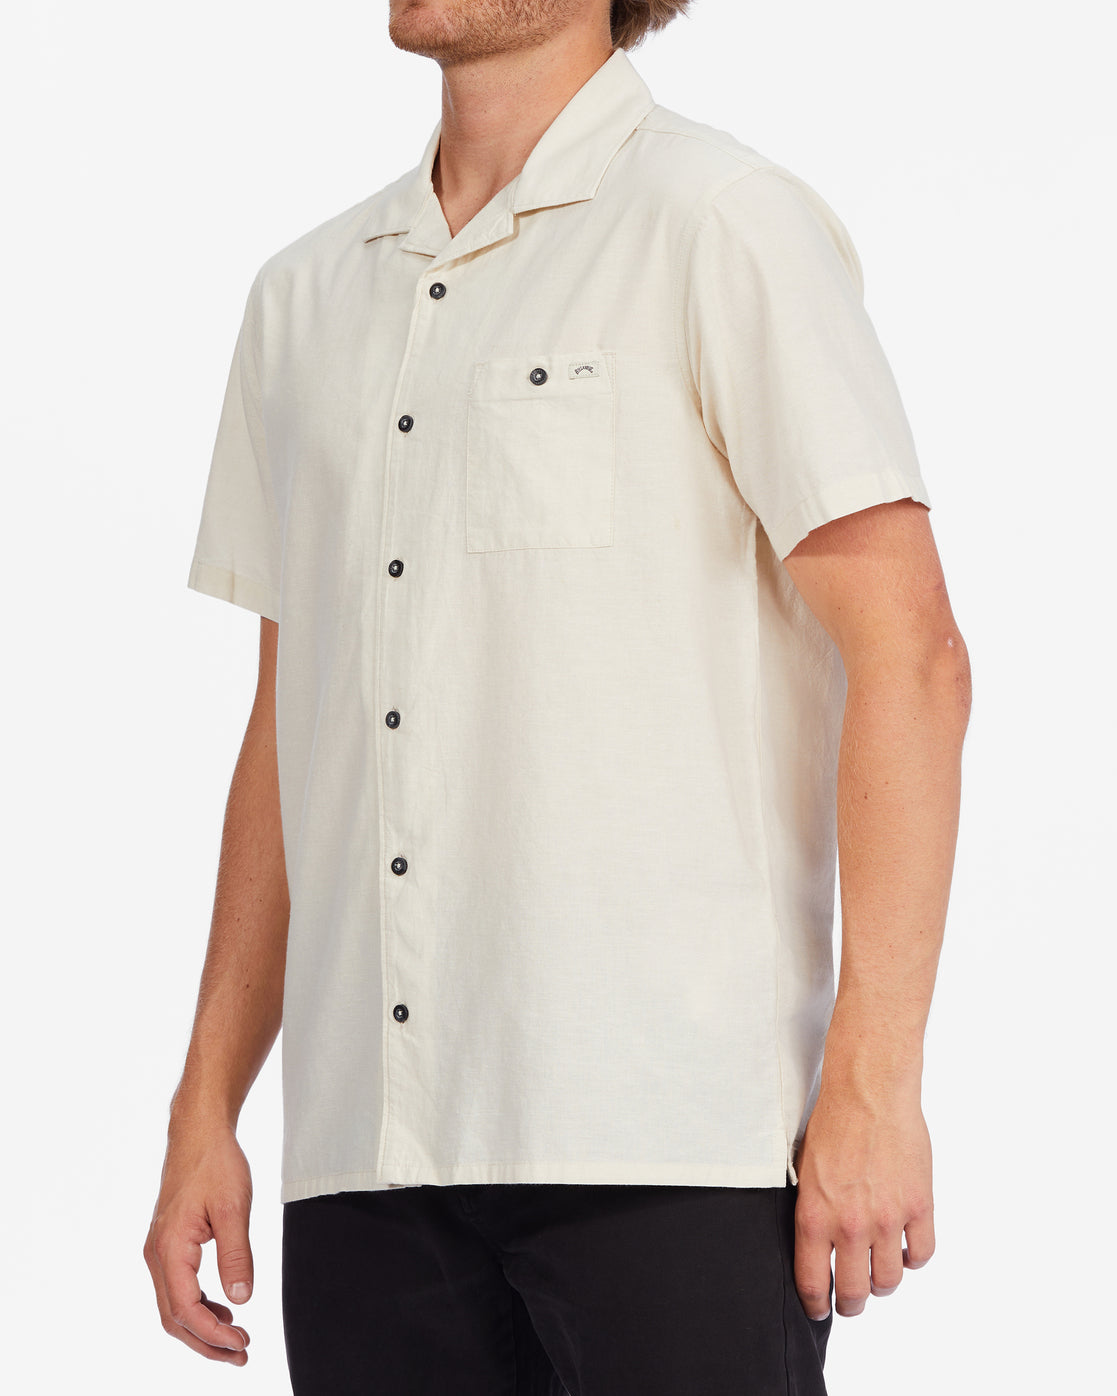 Vacay All Day Short Sleeve Shirt - ABYWT00160